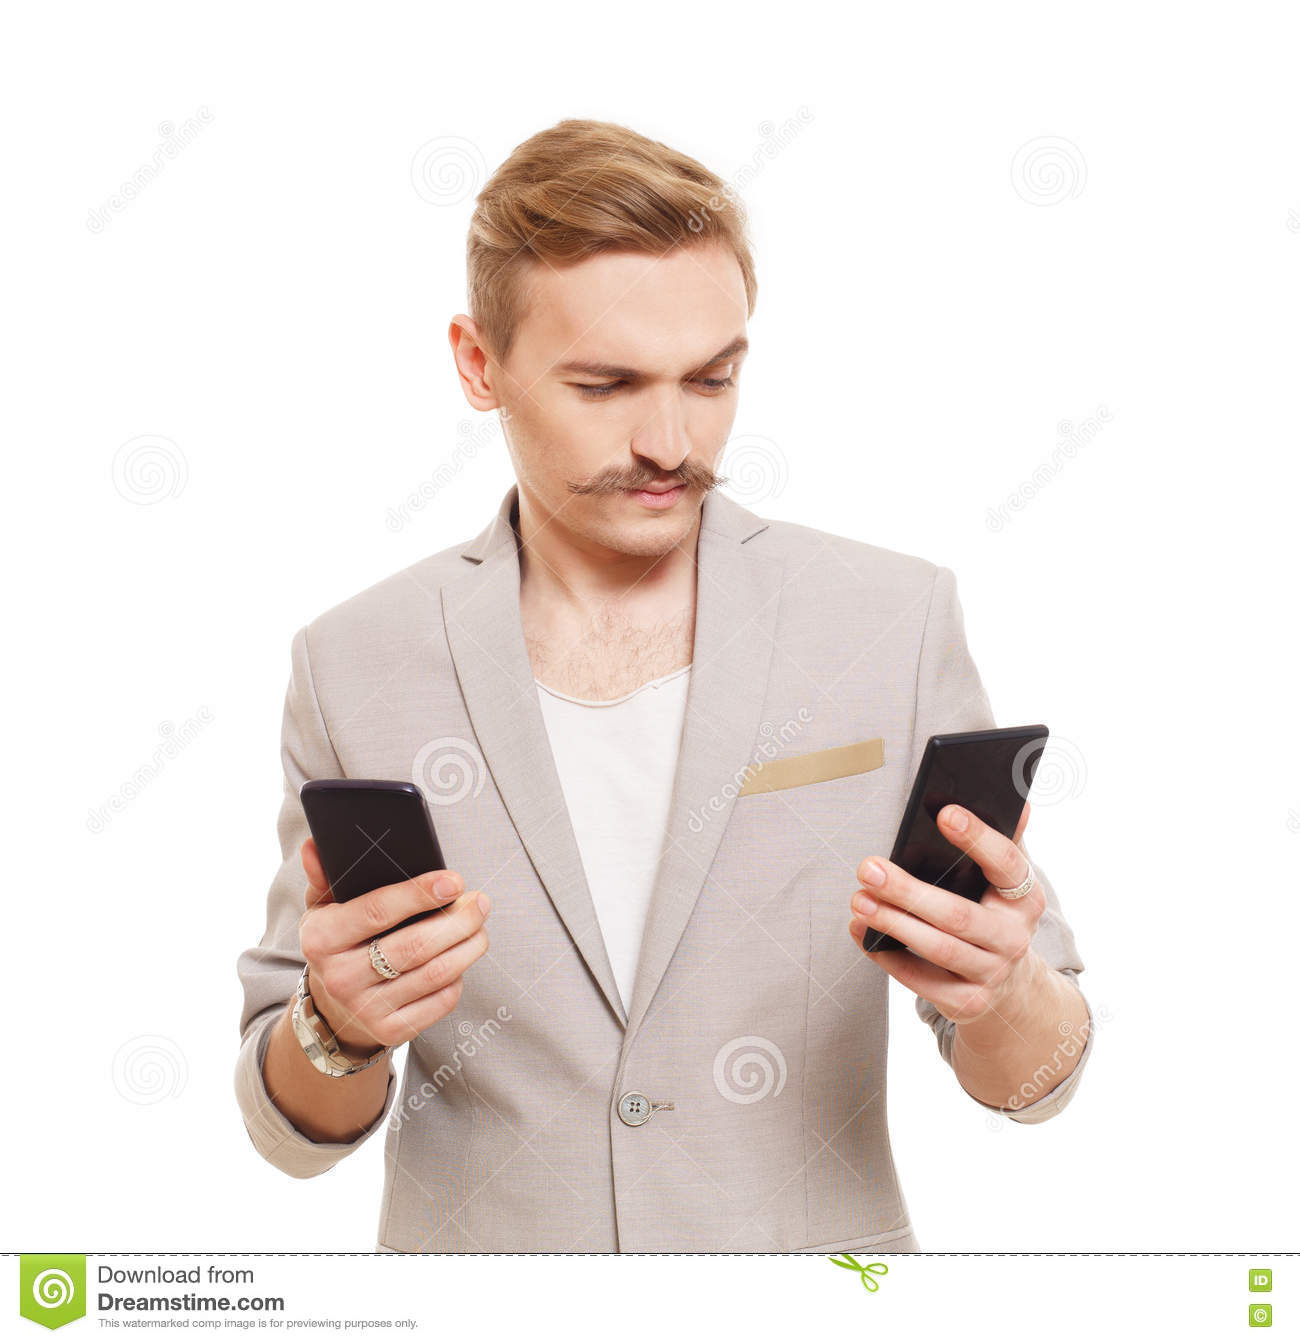 young-man-holding-two-mobile-phones-make-choice-blond-mustache-choose-cell-guy-looks-selecting...jpg